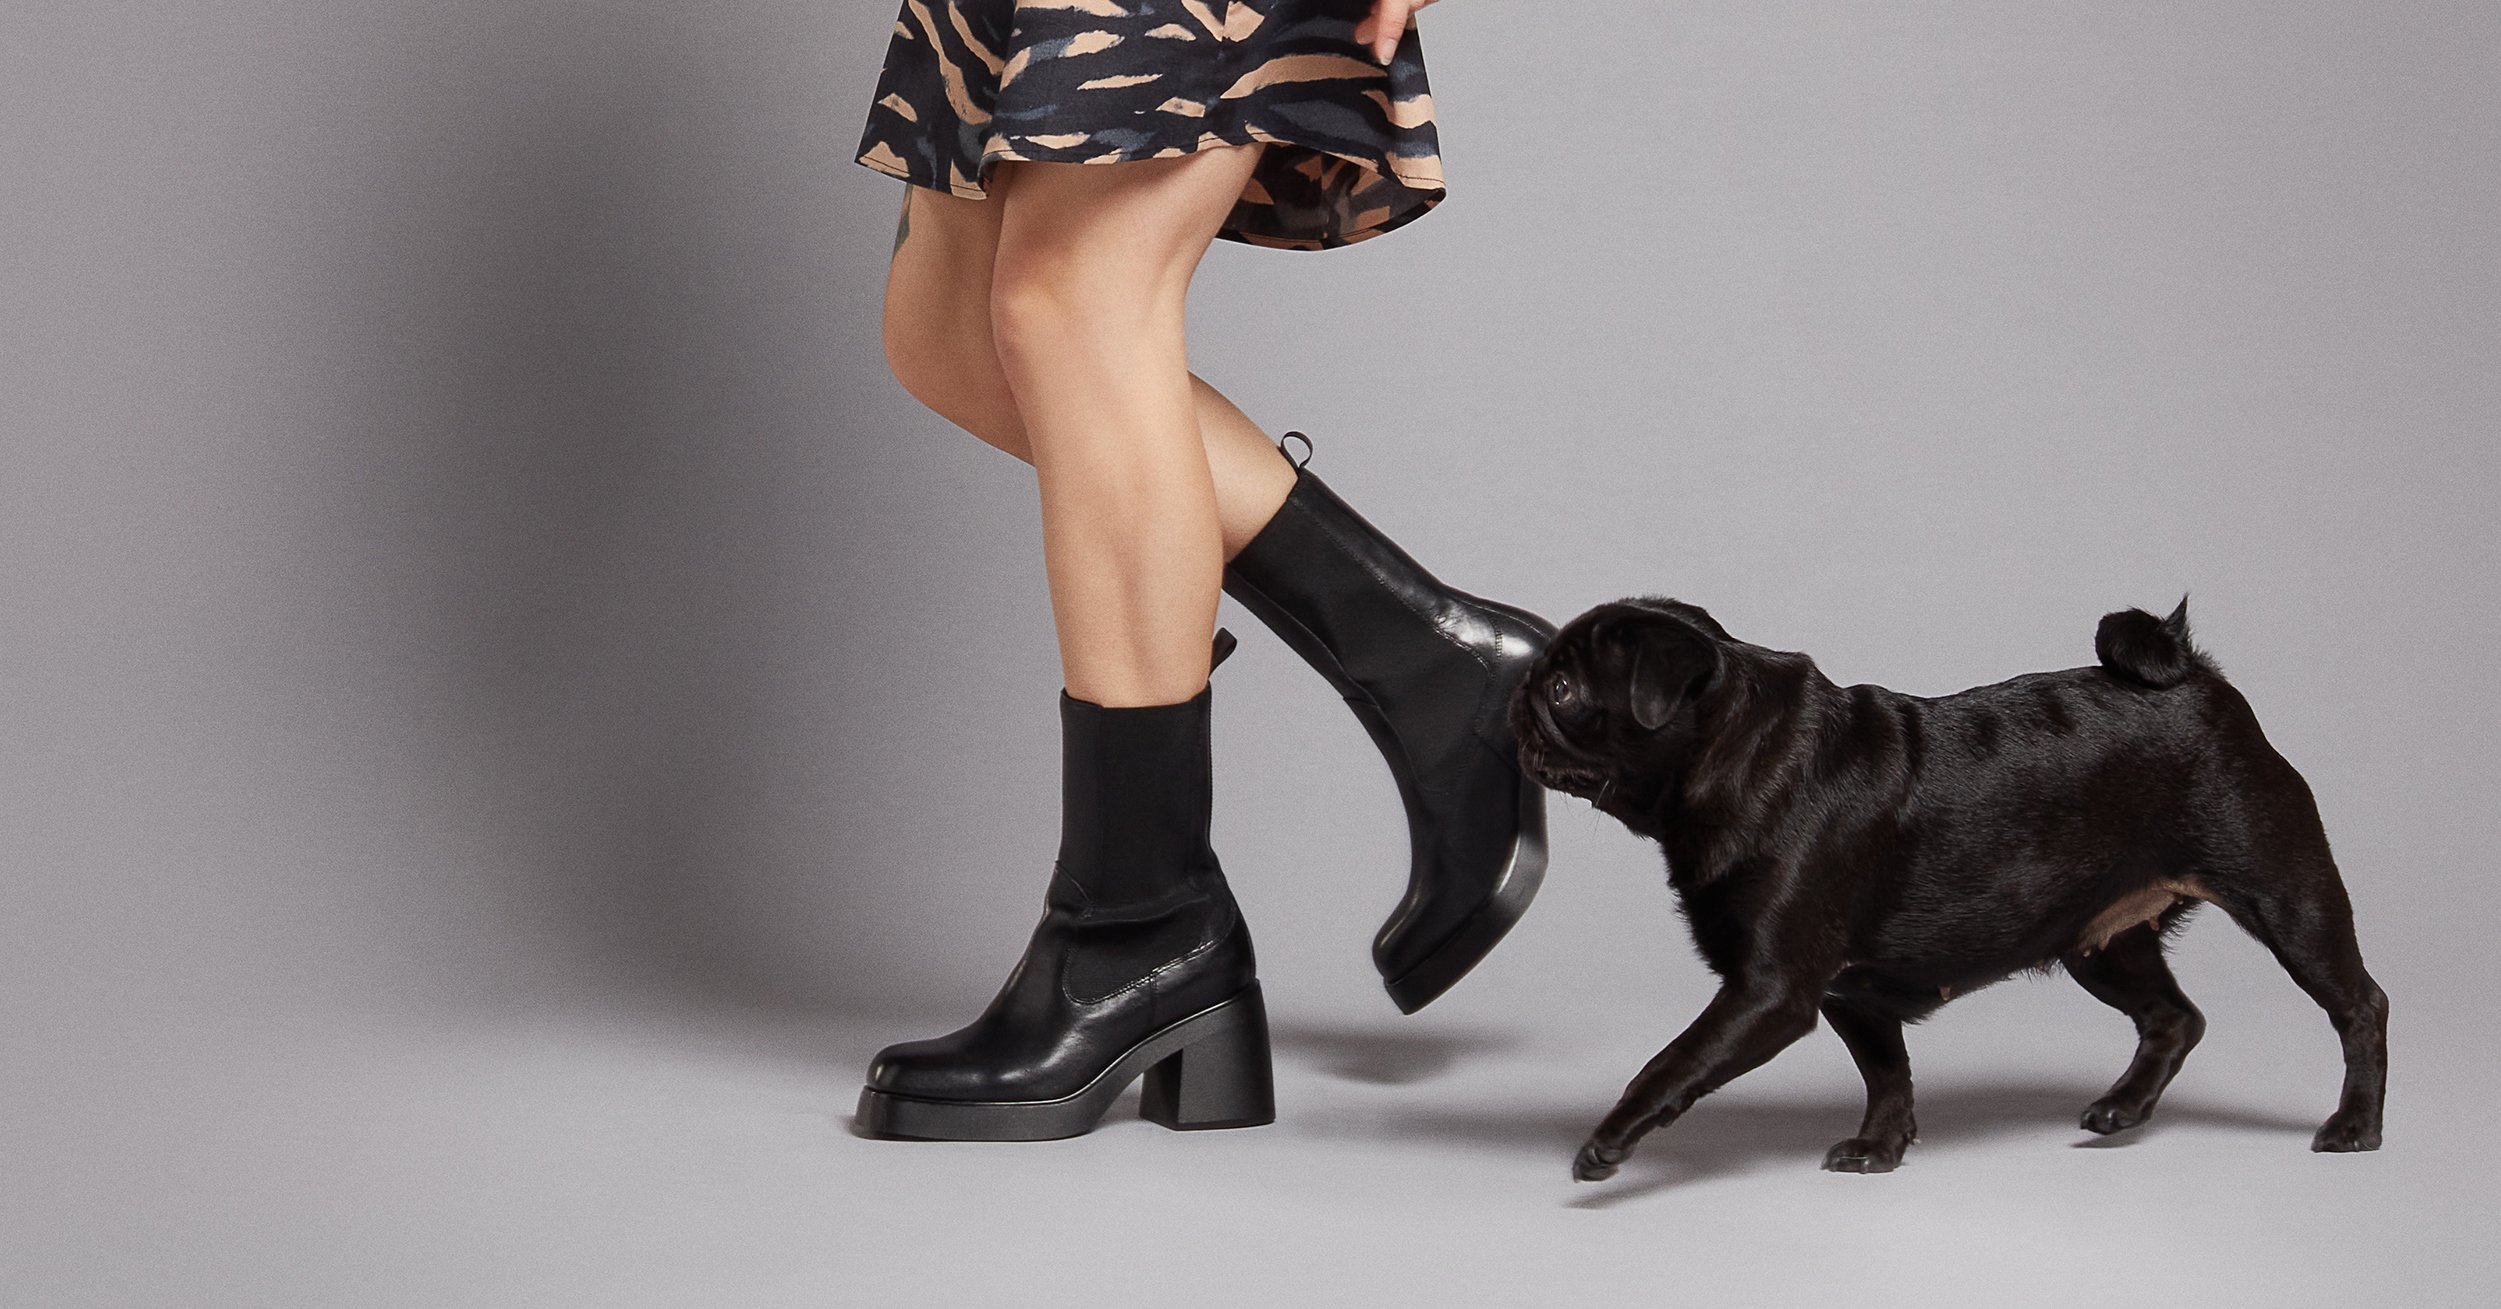 aw21 footwear trends - chunky boot